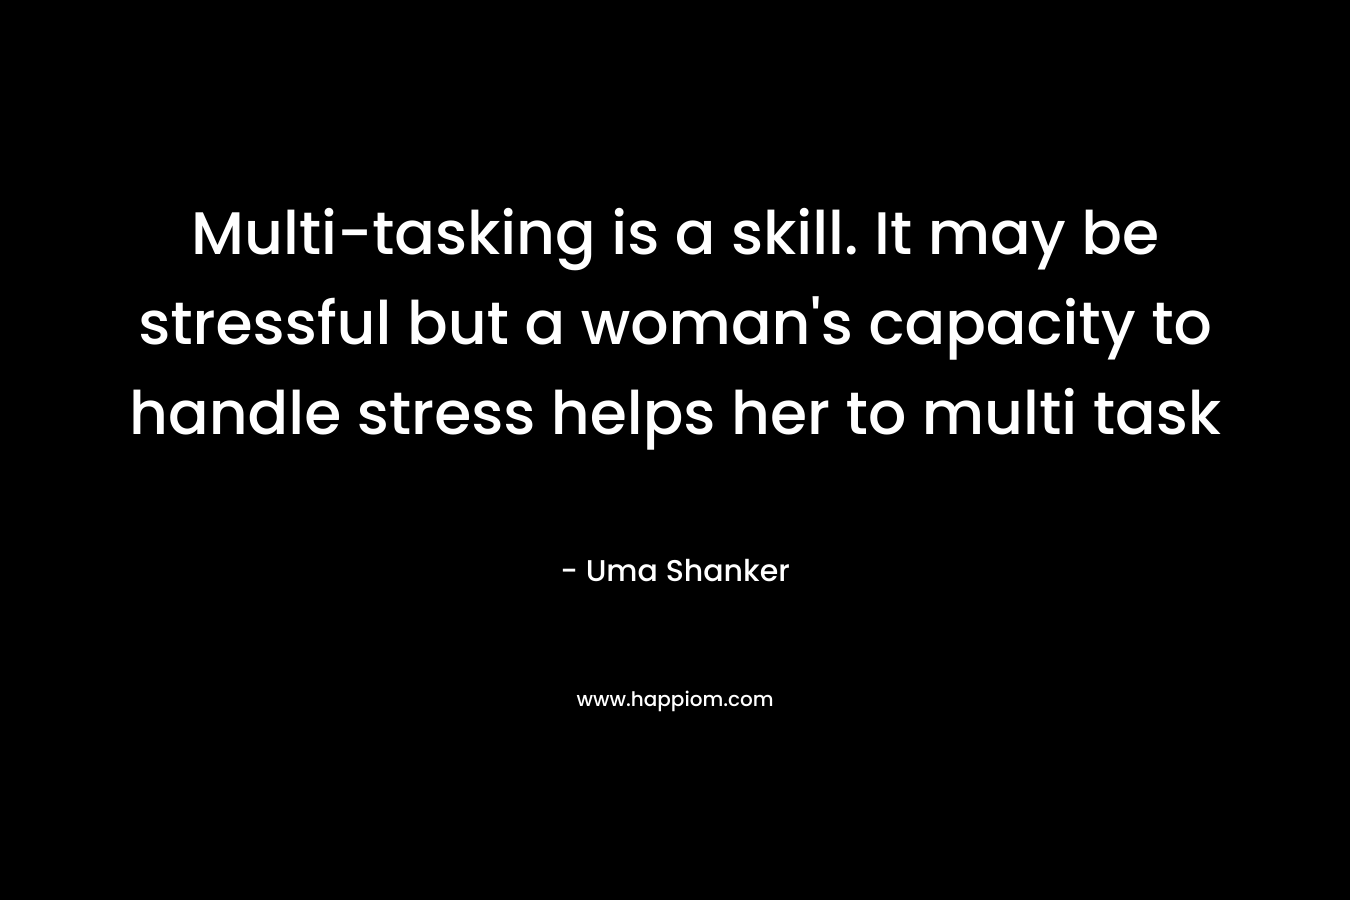 Multi-tasking is a skill. It may be stressful but a woman’s capacity to handle stress helps her to multi task – Uma Shanker